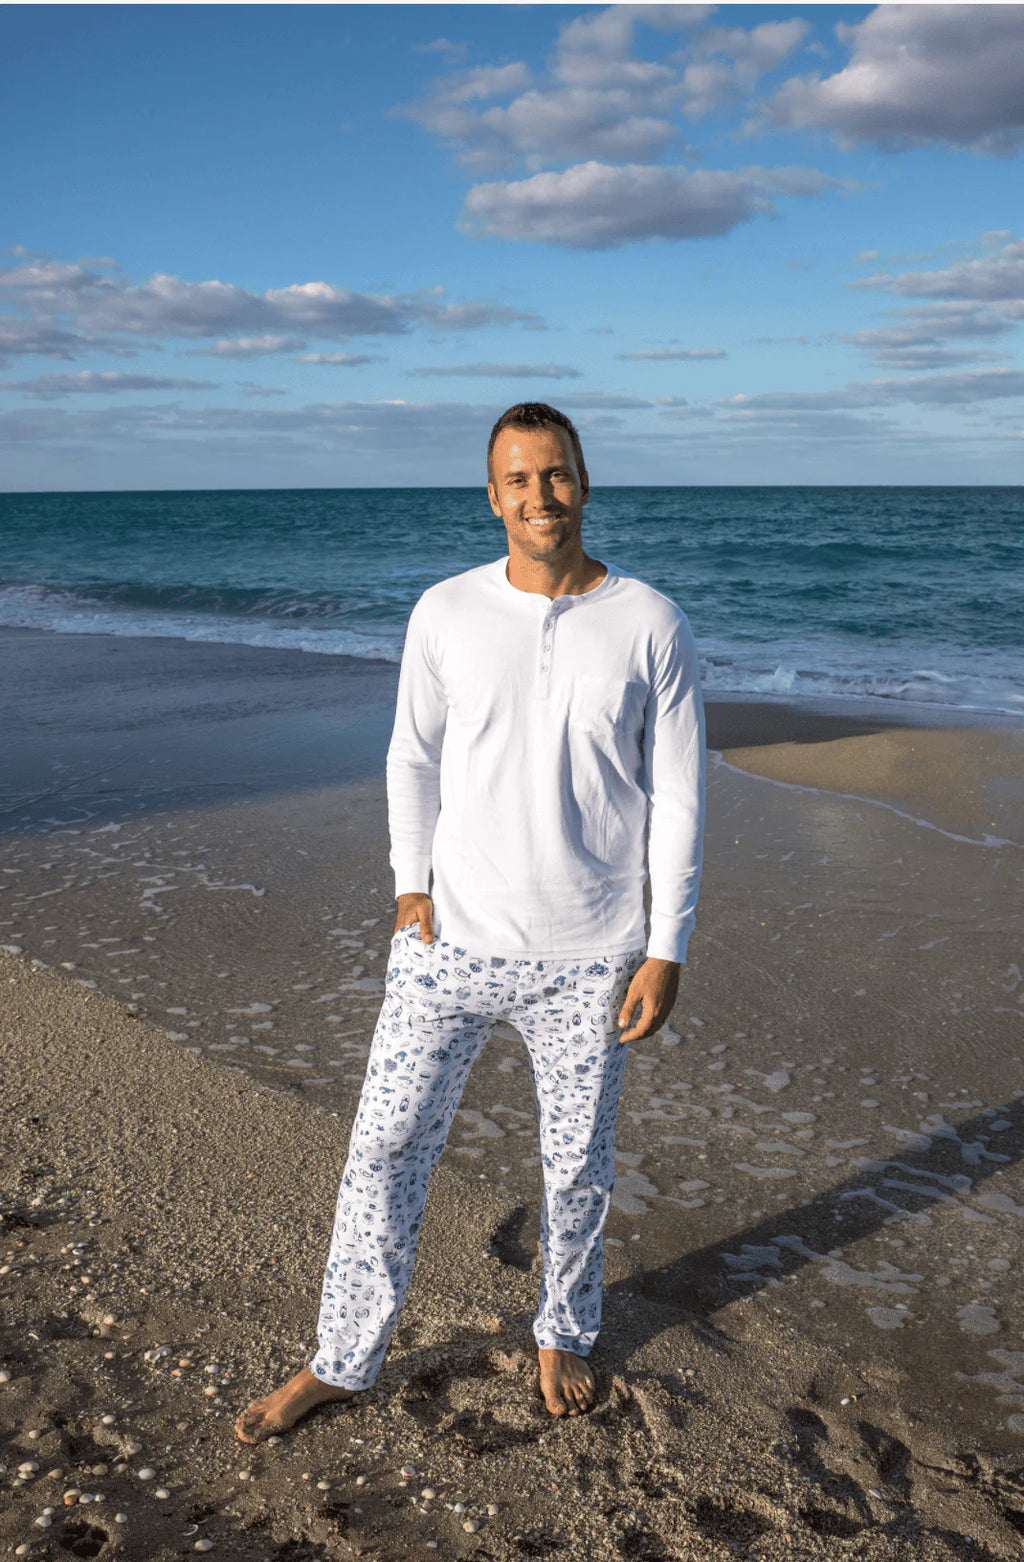 Embracing both comfort and coastal allure, a man stands confidently on the beach, dressed in stylish Erica Wilson pajamas